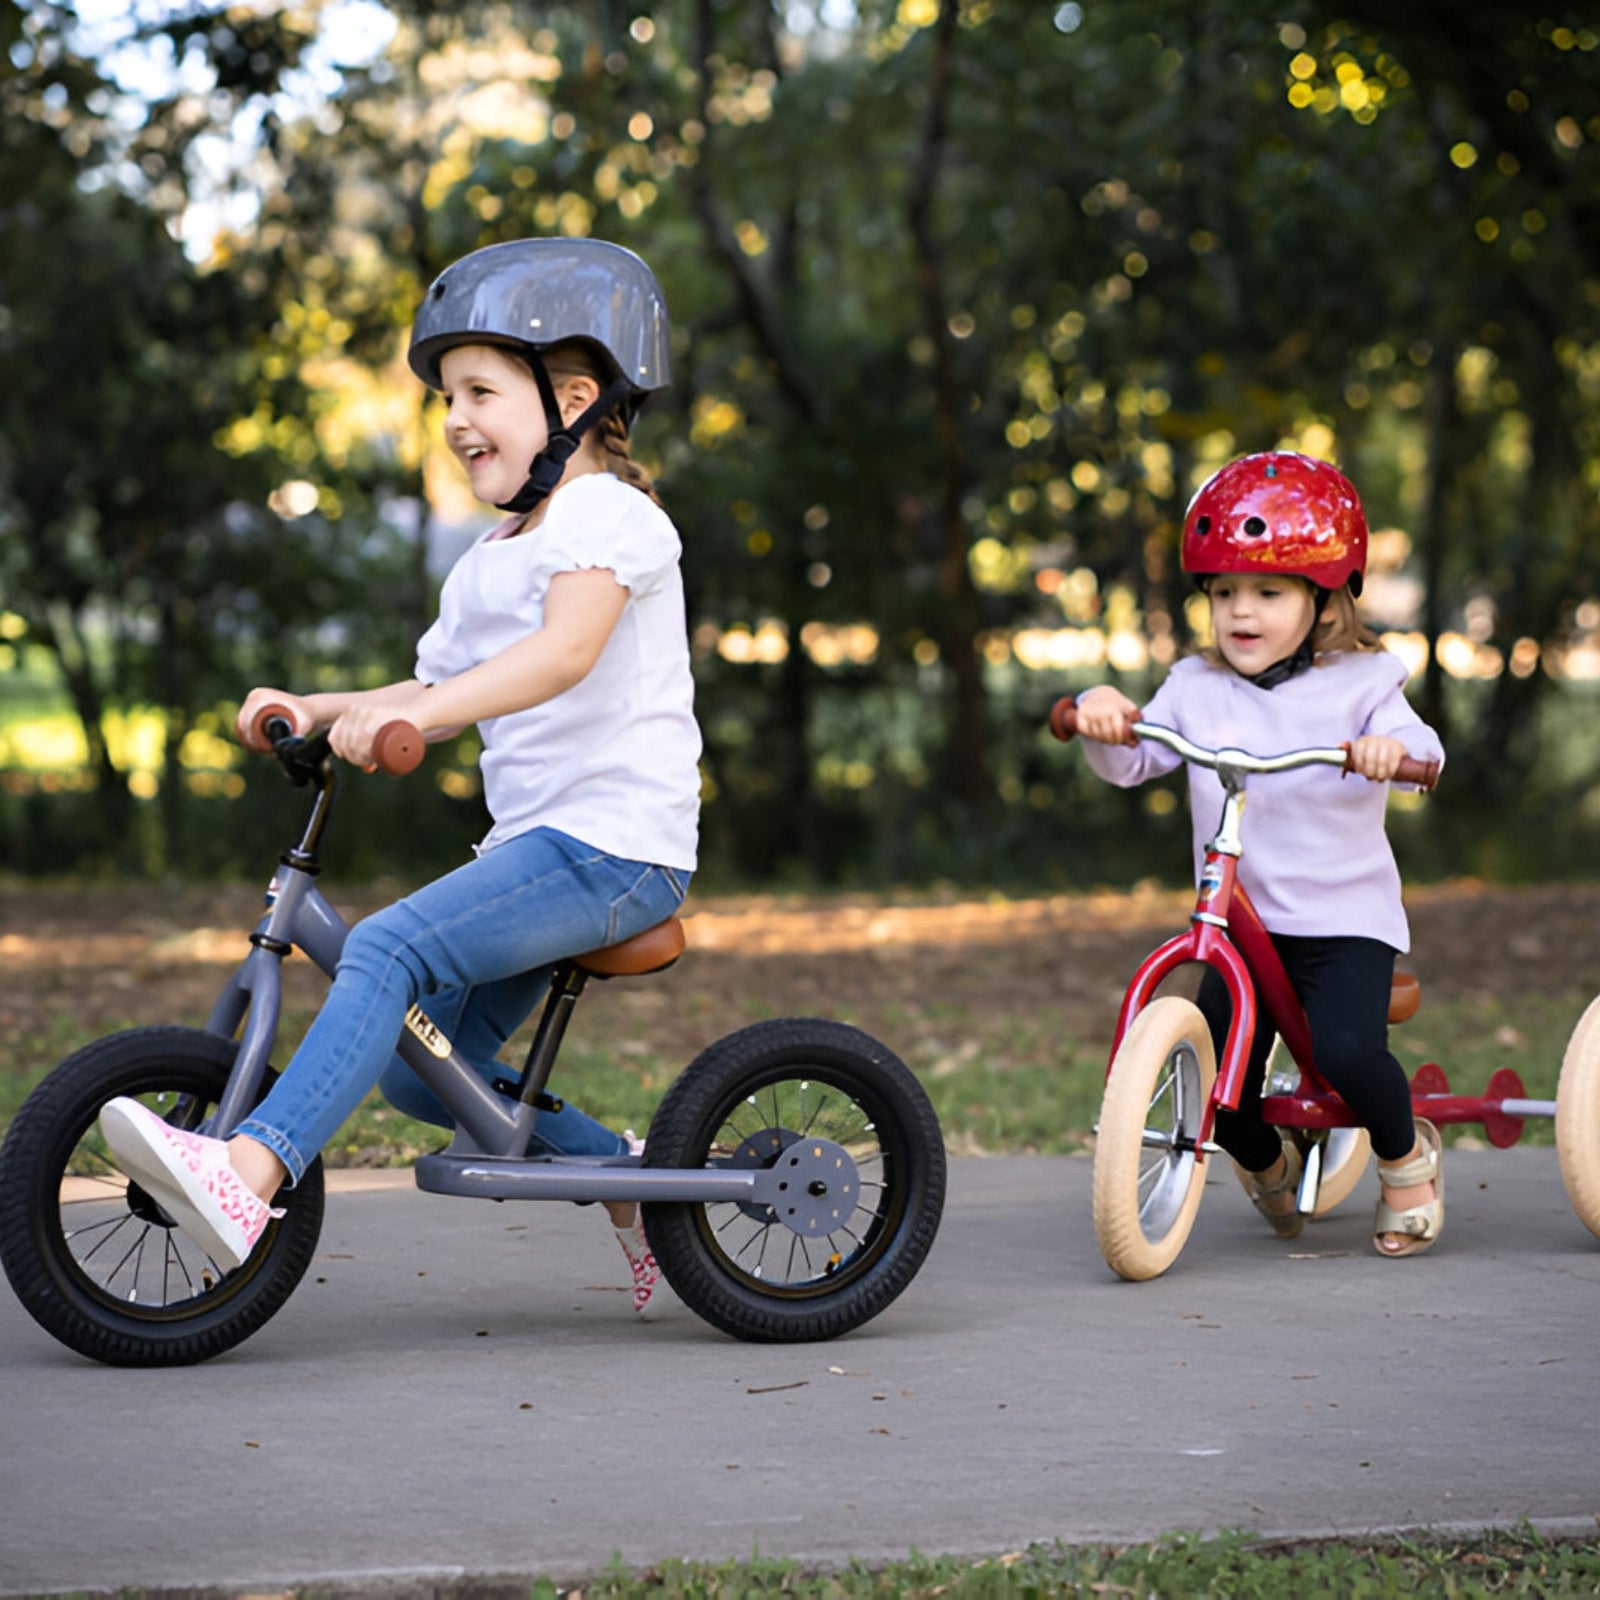 Children having fun riding a Grey Trybike and a vintage red trybike in the park.